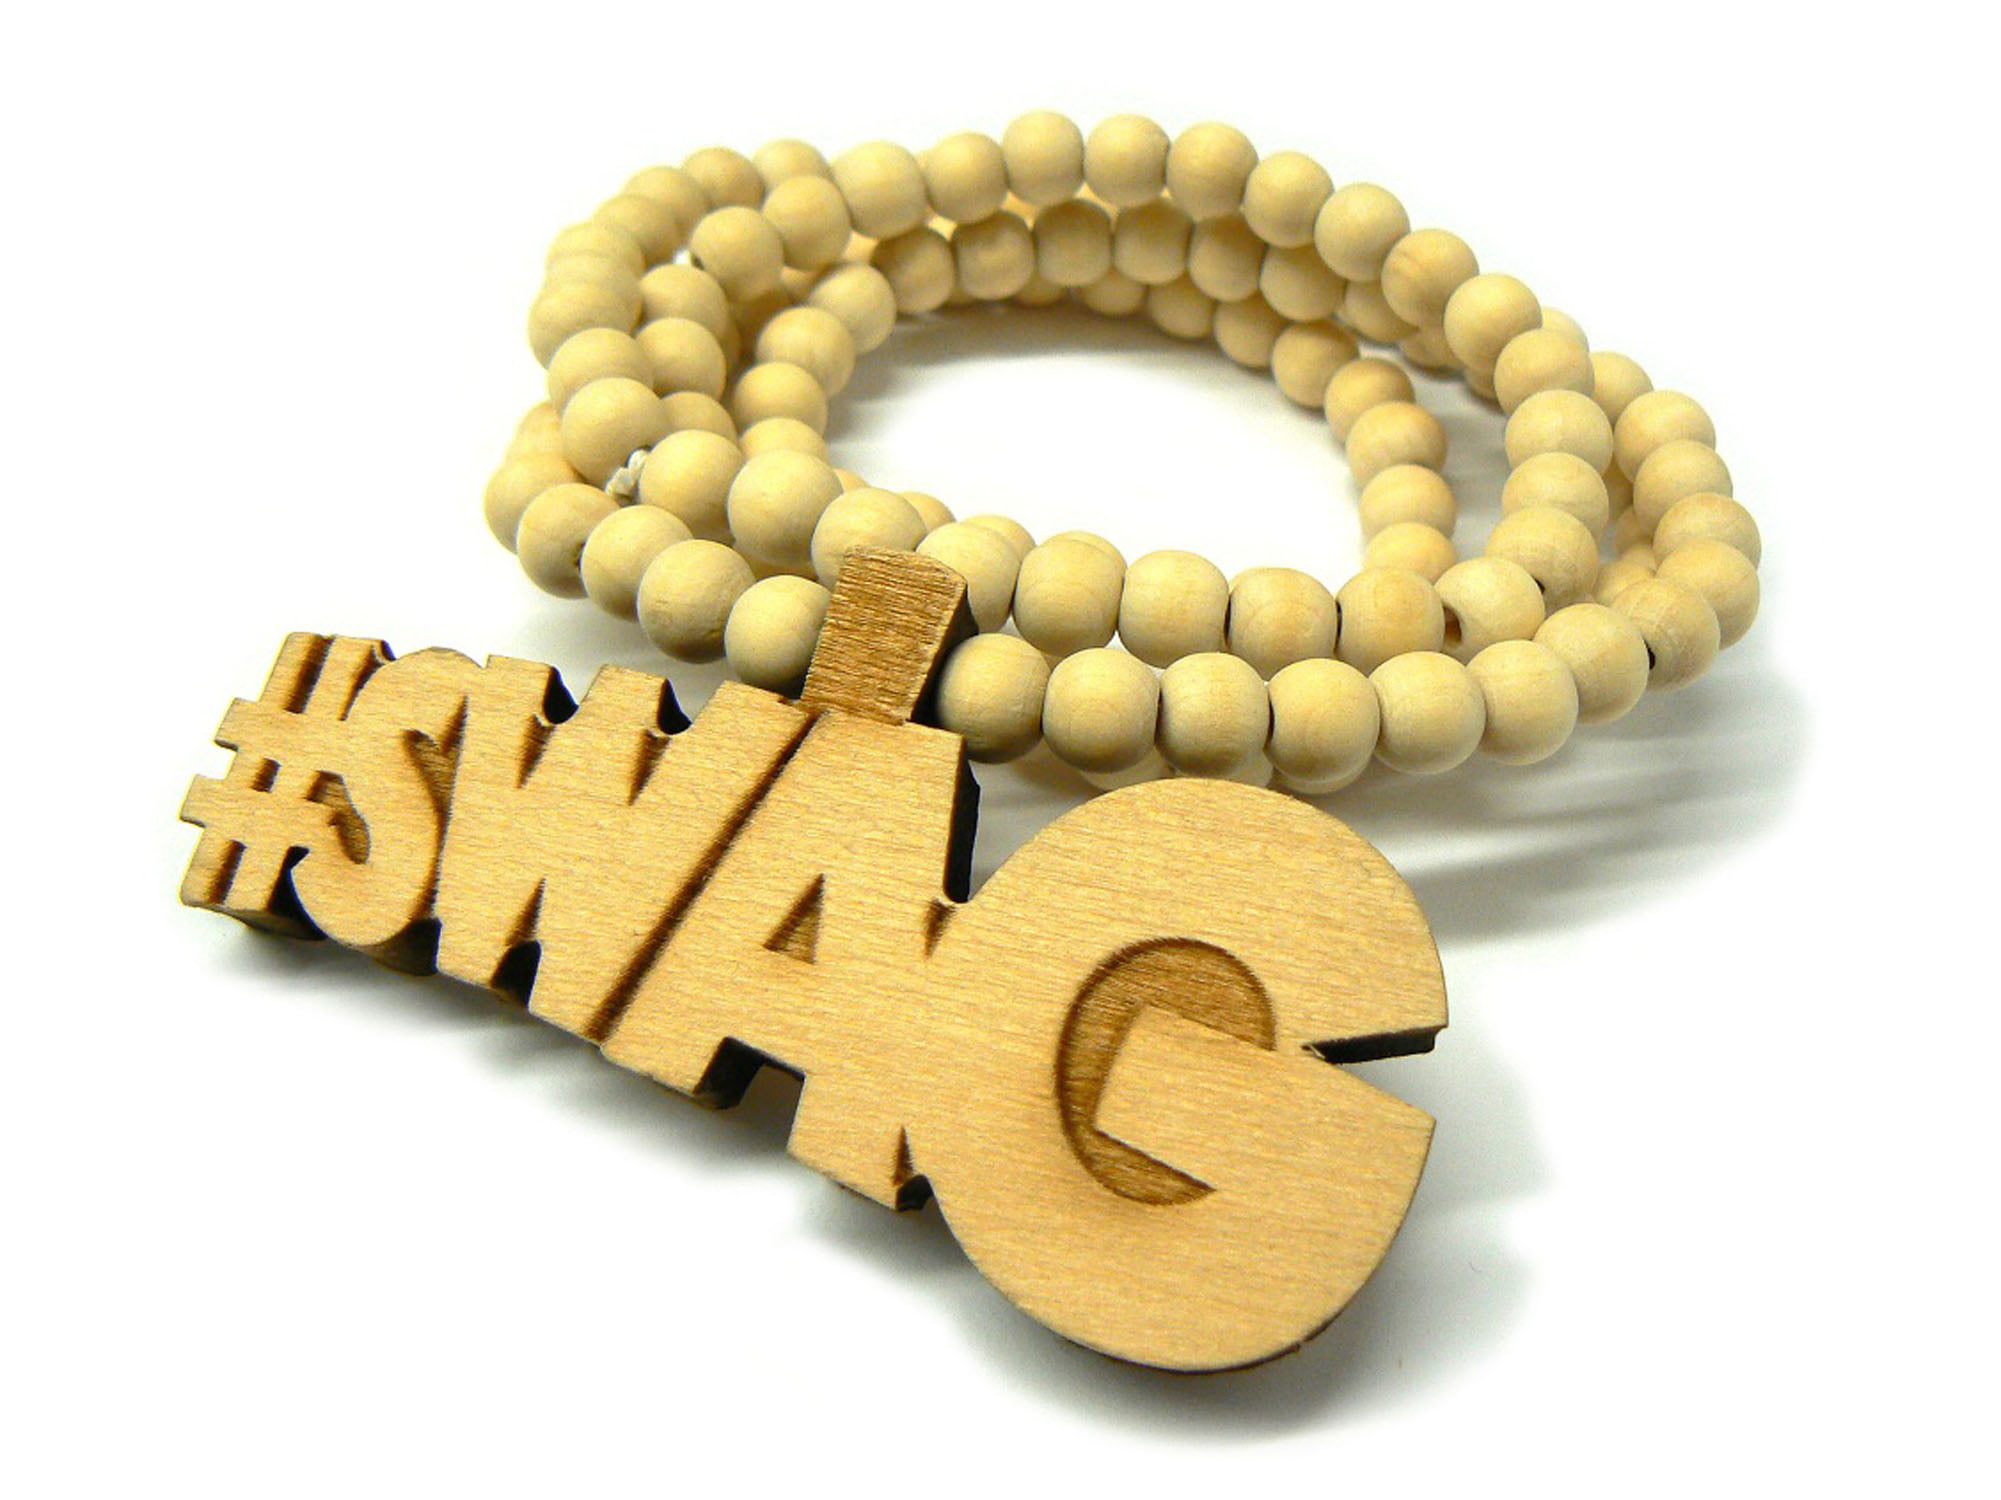 NYFASHION101 #Swag Wood Pendant 36 Wooden Bead Chain Necklace